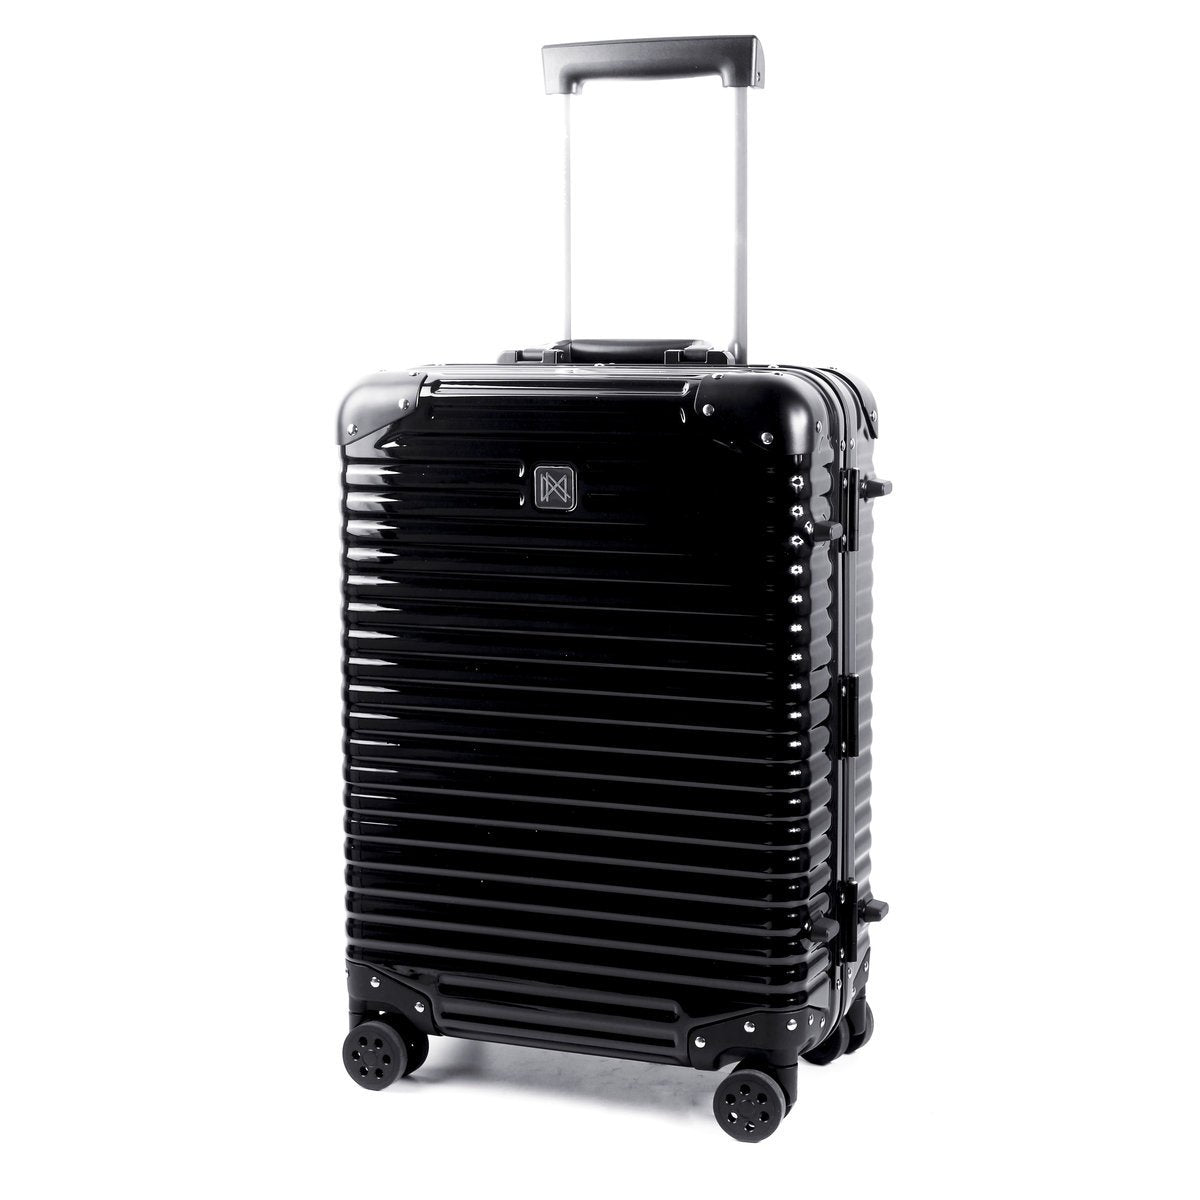 Lanzzo Norman Light Series Black 27 -inch Travel Luggage 42704.27 